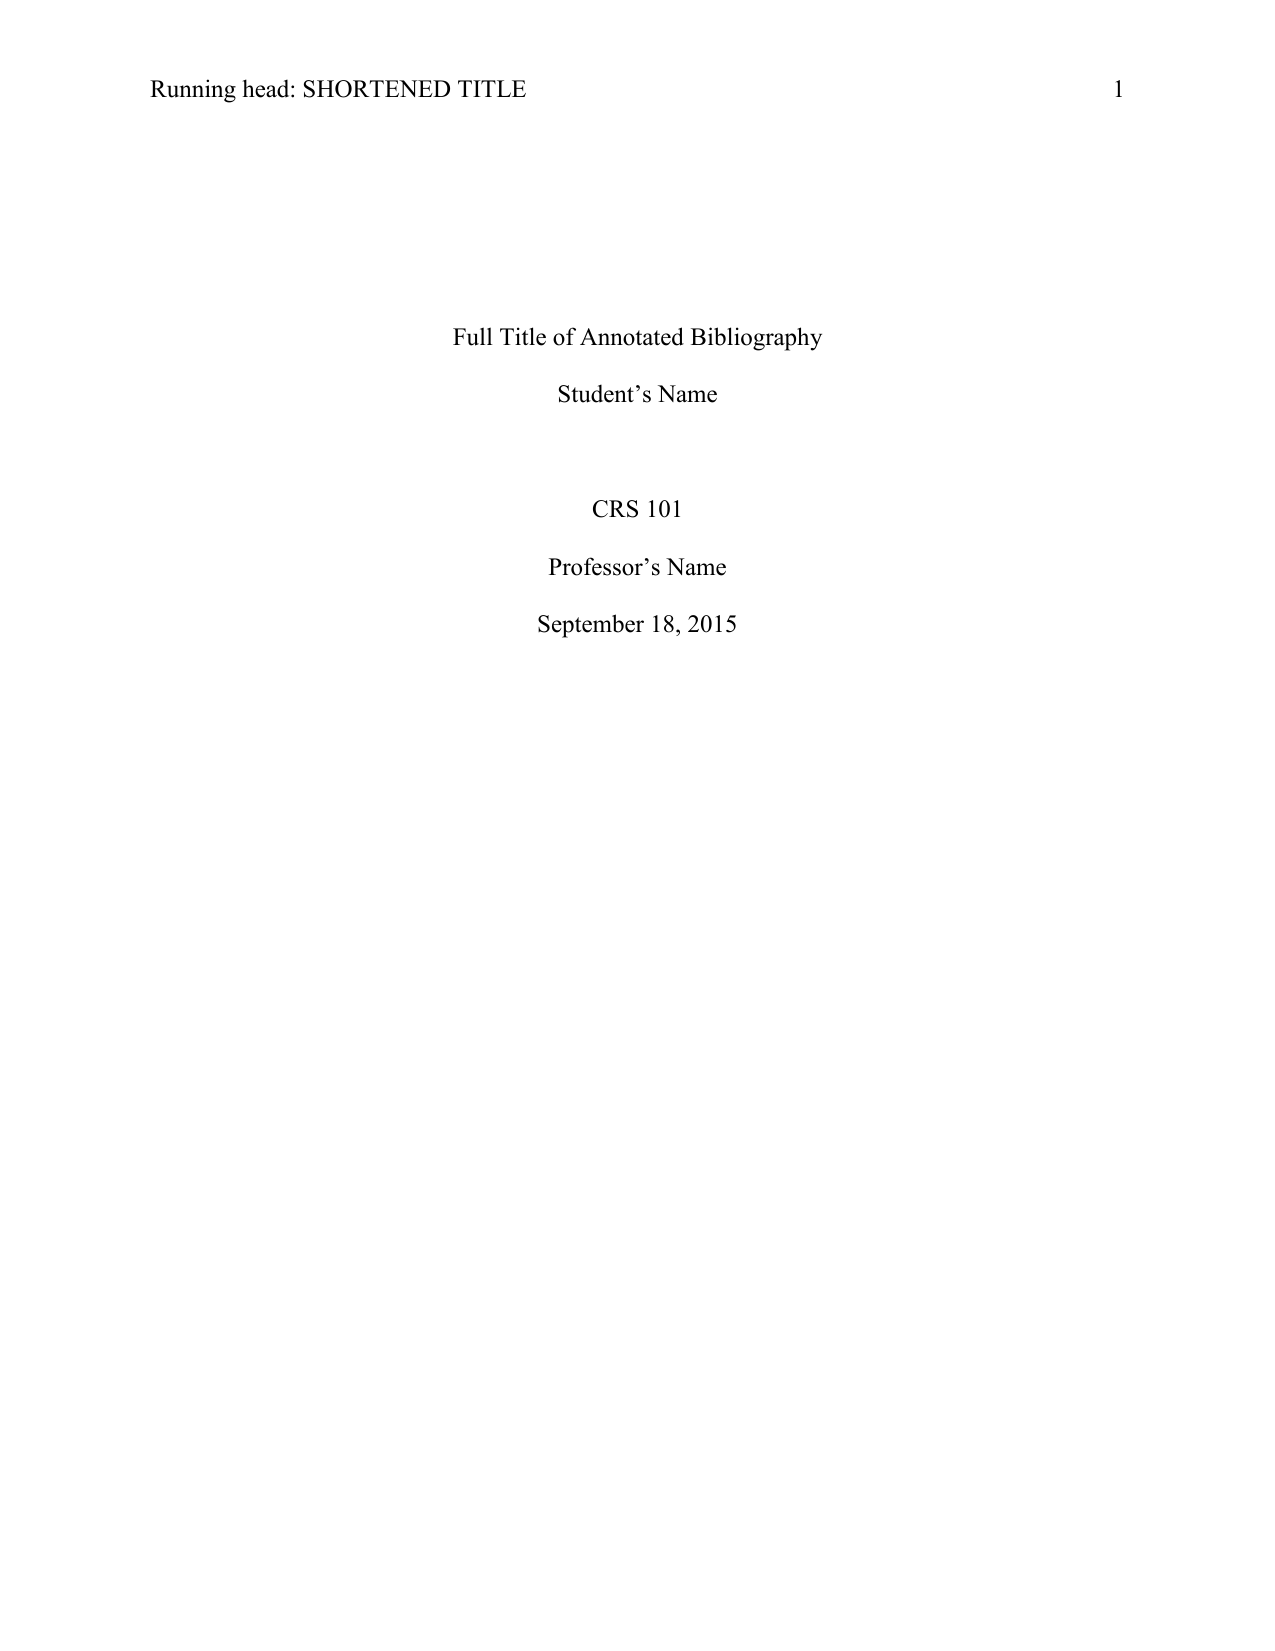 apa-annotated-bibliography-template